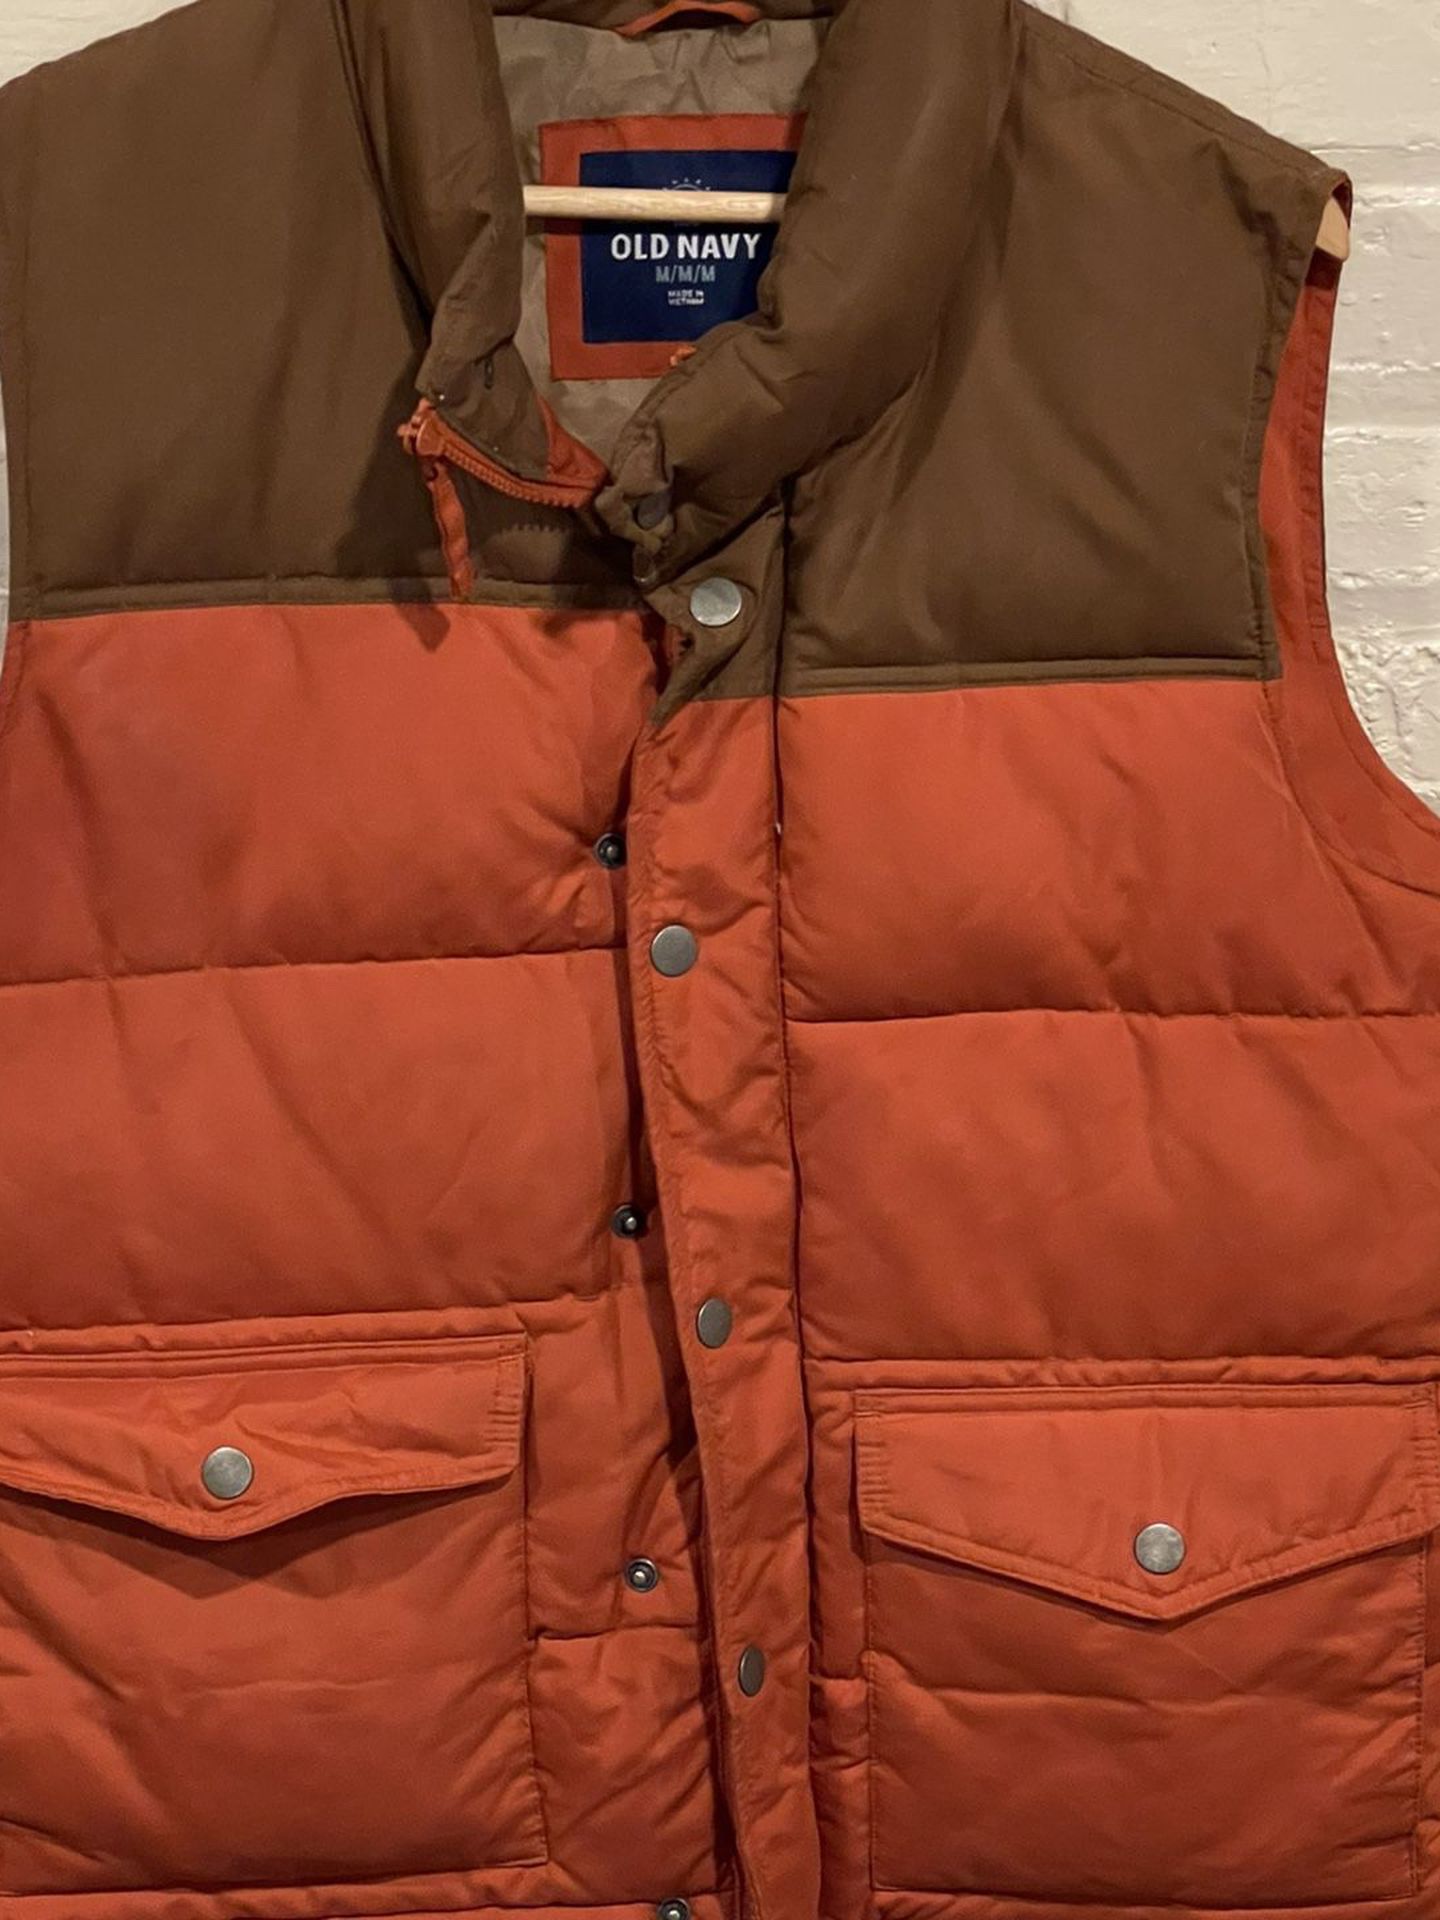 Men’s Puffy Vests From Old Navy (Qty 2 Size Medium)